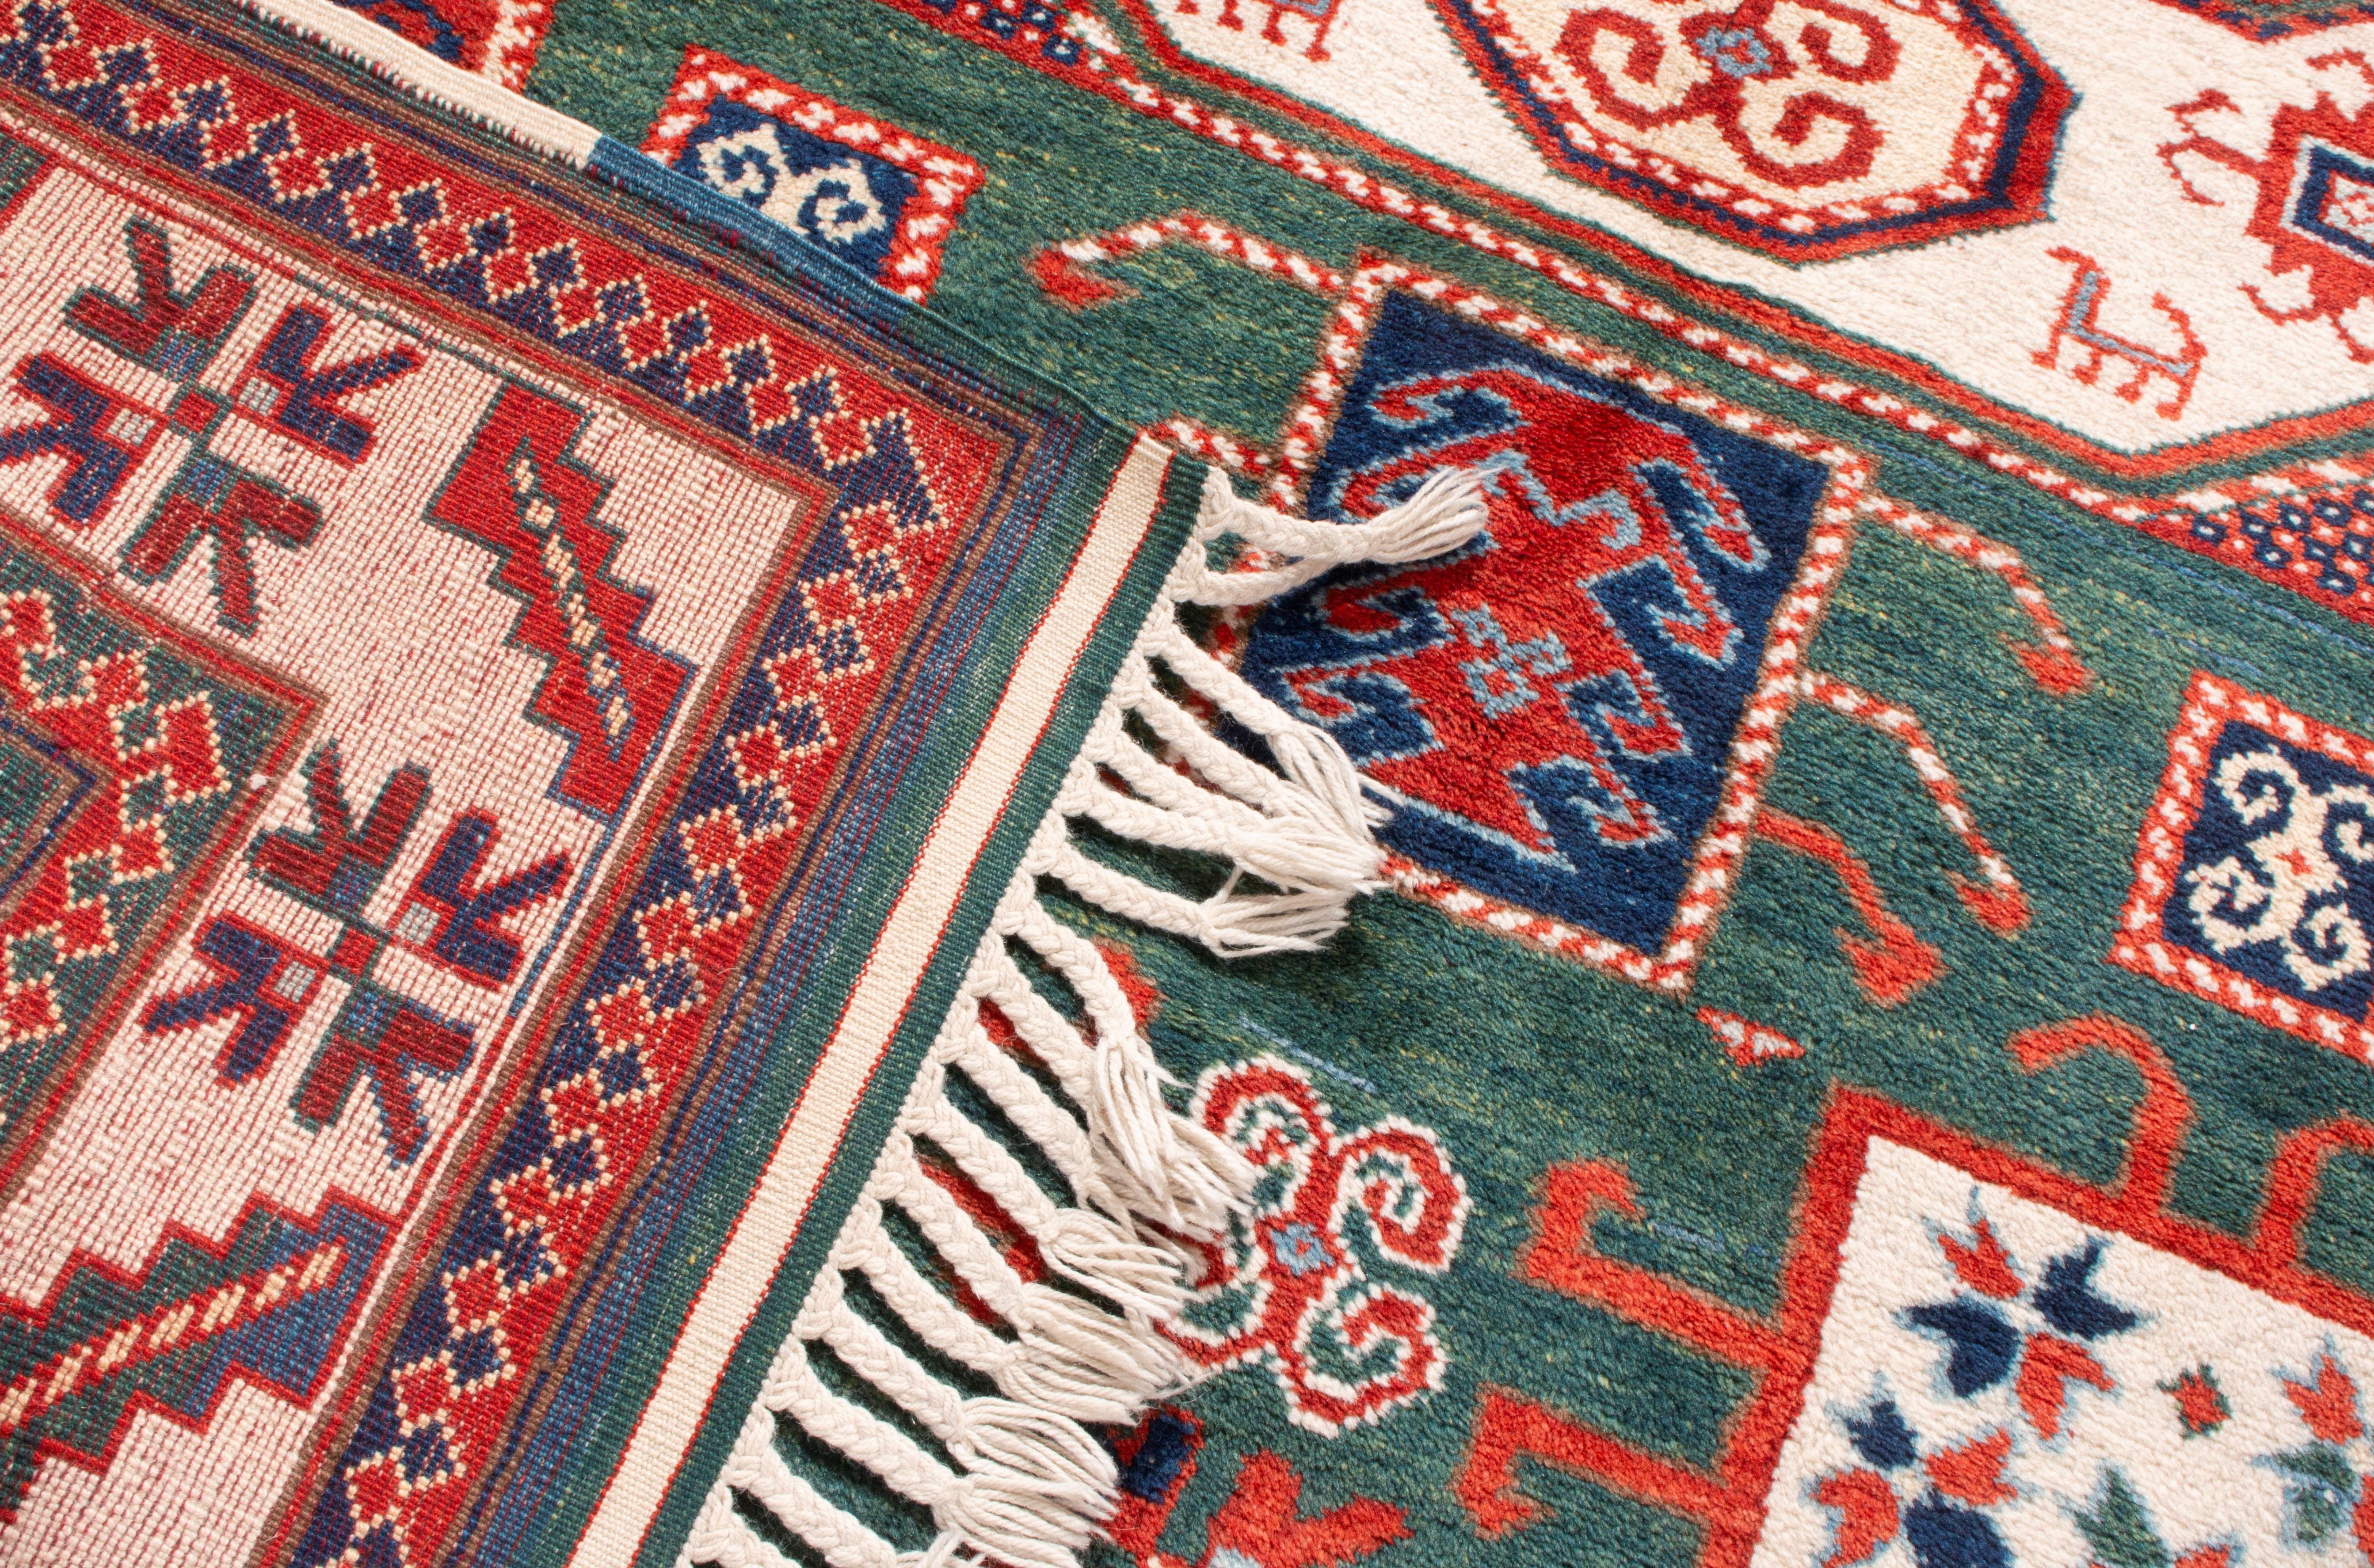 Rug & Kilim's New Kazak Transitional Red and Green Wool Rug with Horn Motifs (en anglais seulement) Neuf - En vente à Long Island City, NY